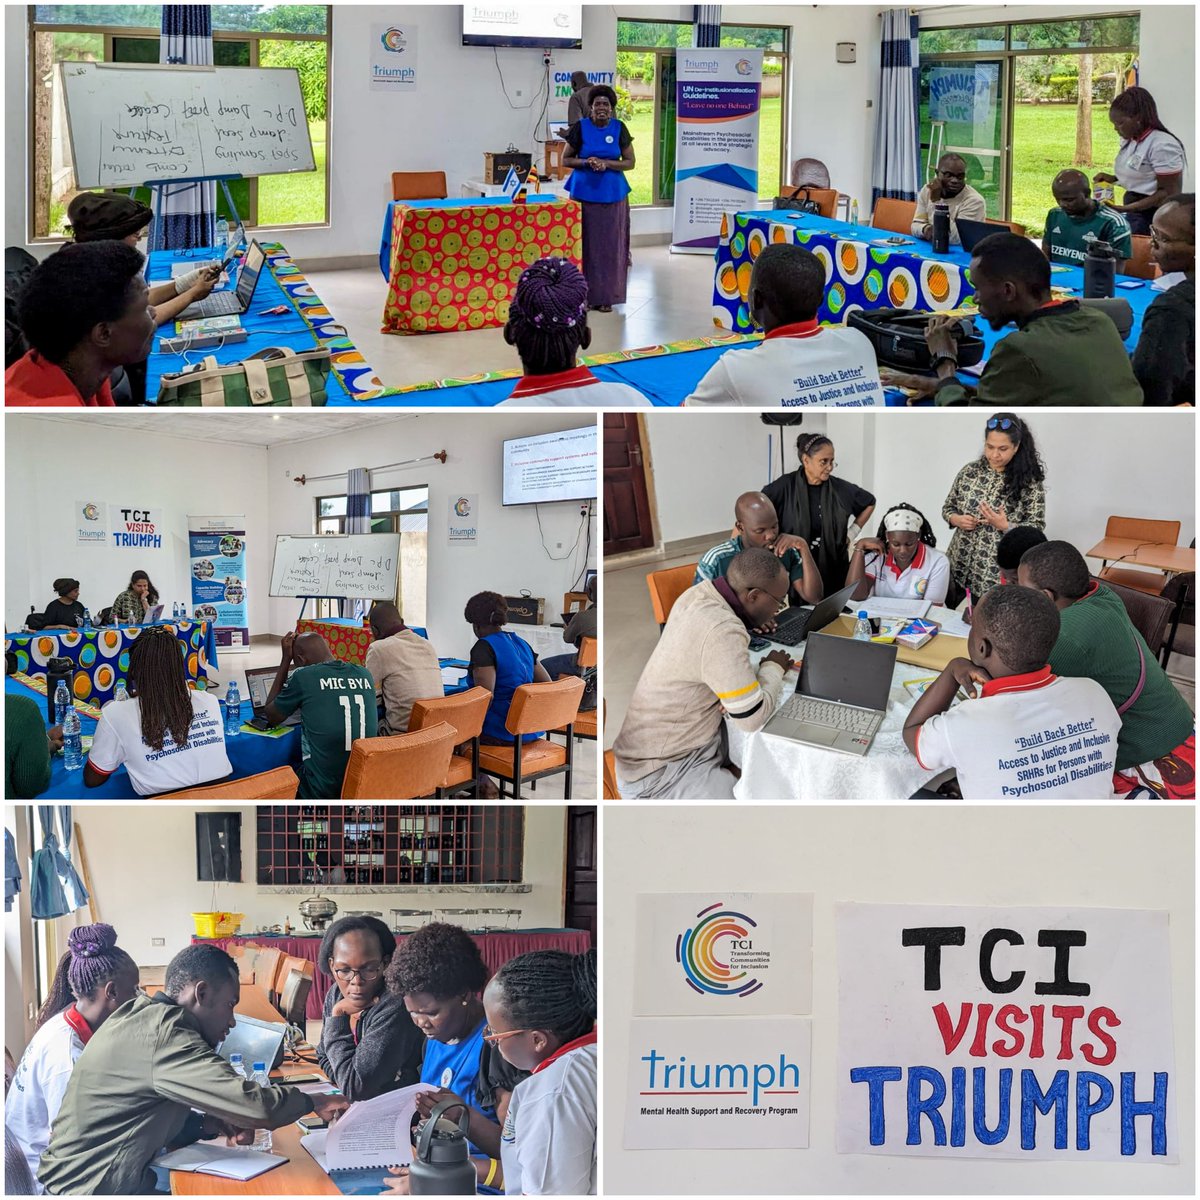 TCI begins its field visit to Uganda for the Community Inclusion project starting with the Orientation of Community Inclusion tools along with its National OPD TRIUMPH. 

#CommunityInclusion #Uganda #OPD #TRIUMPH #TCIGlobal